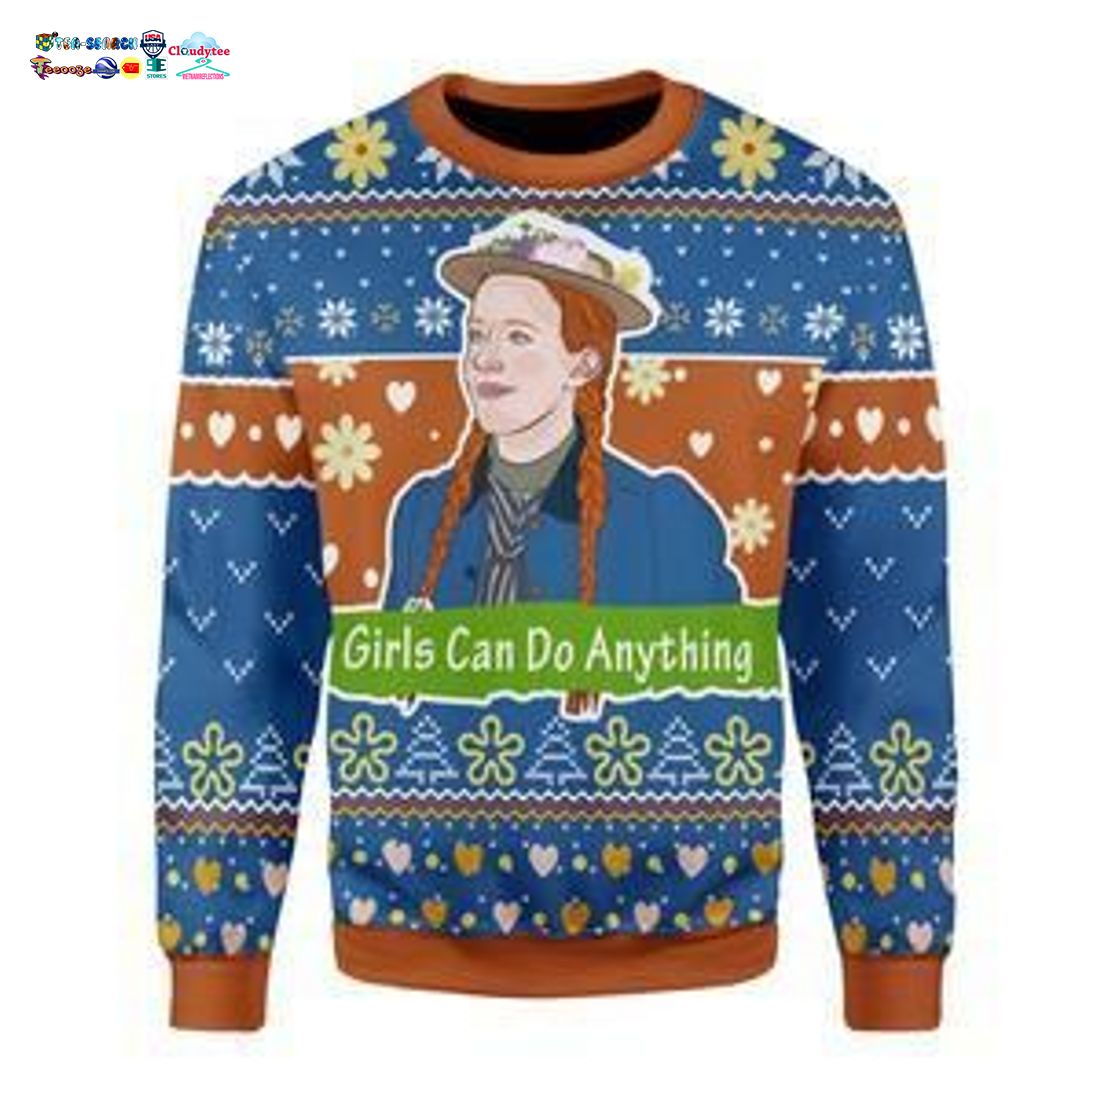 Girls Can Do Anything Ugly Christmas Sweater - You look beautiful forever